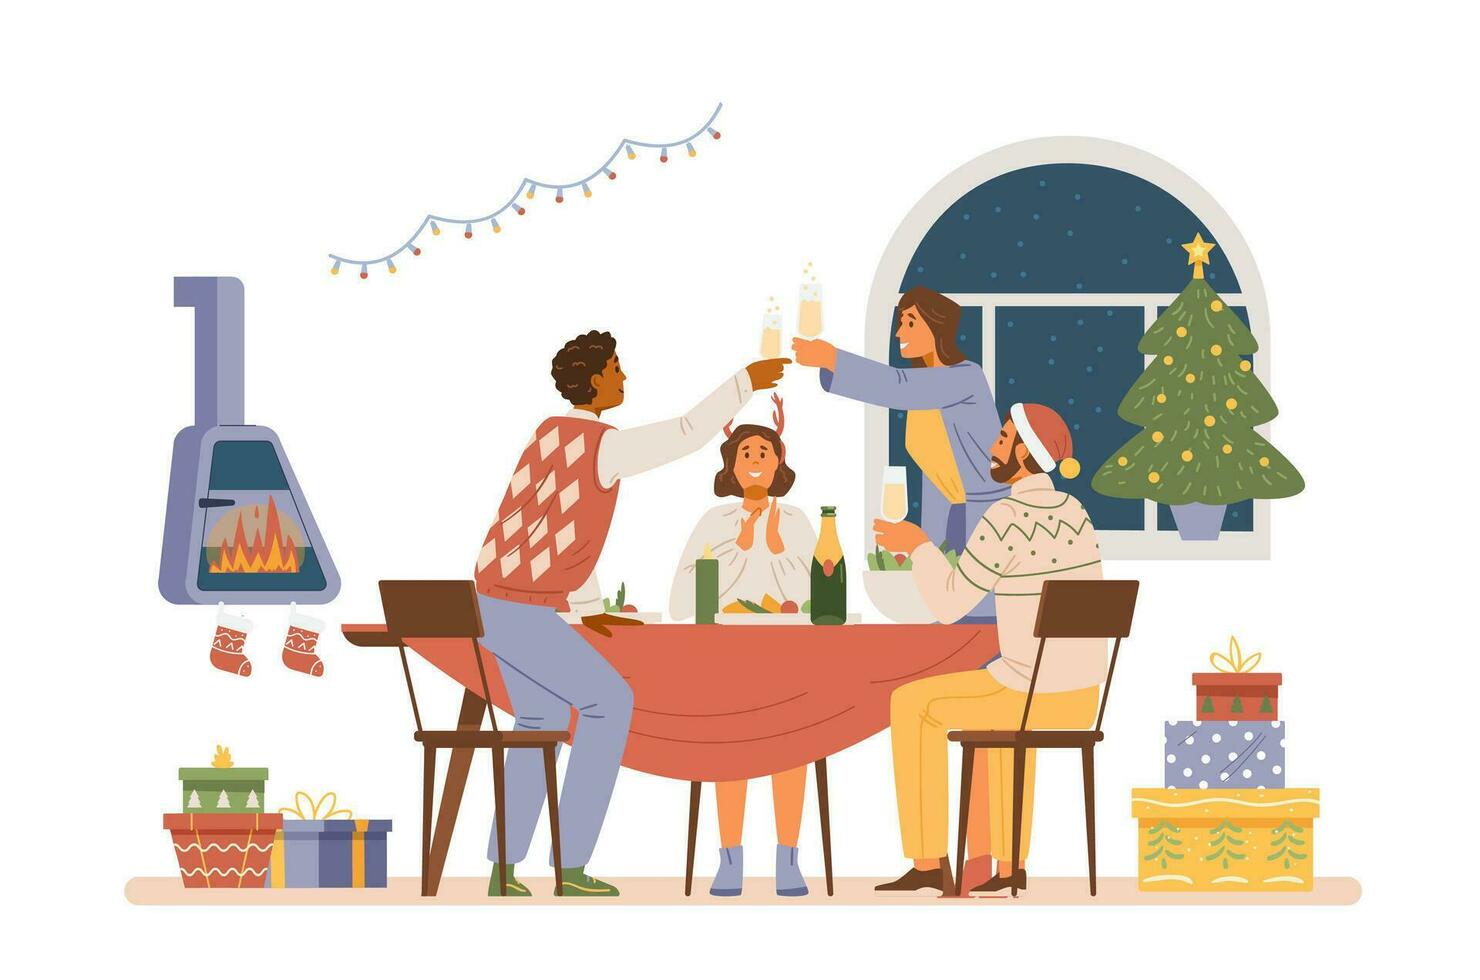 Christmas party at home flat vector illustration. Friends at dinner table with glasses of champagne laughing.